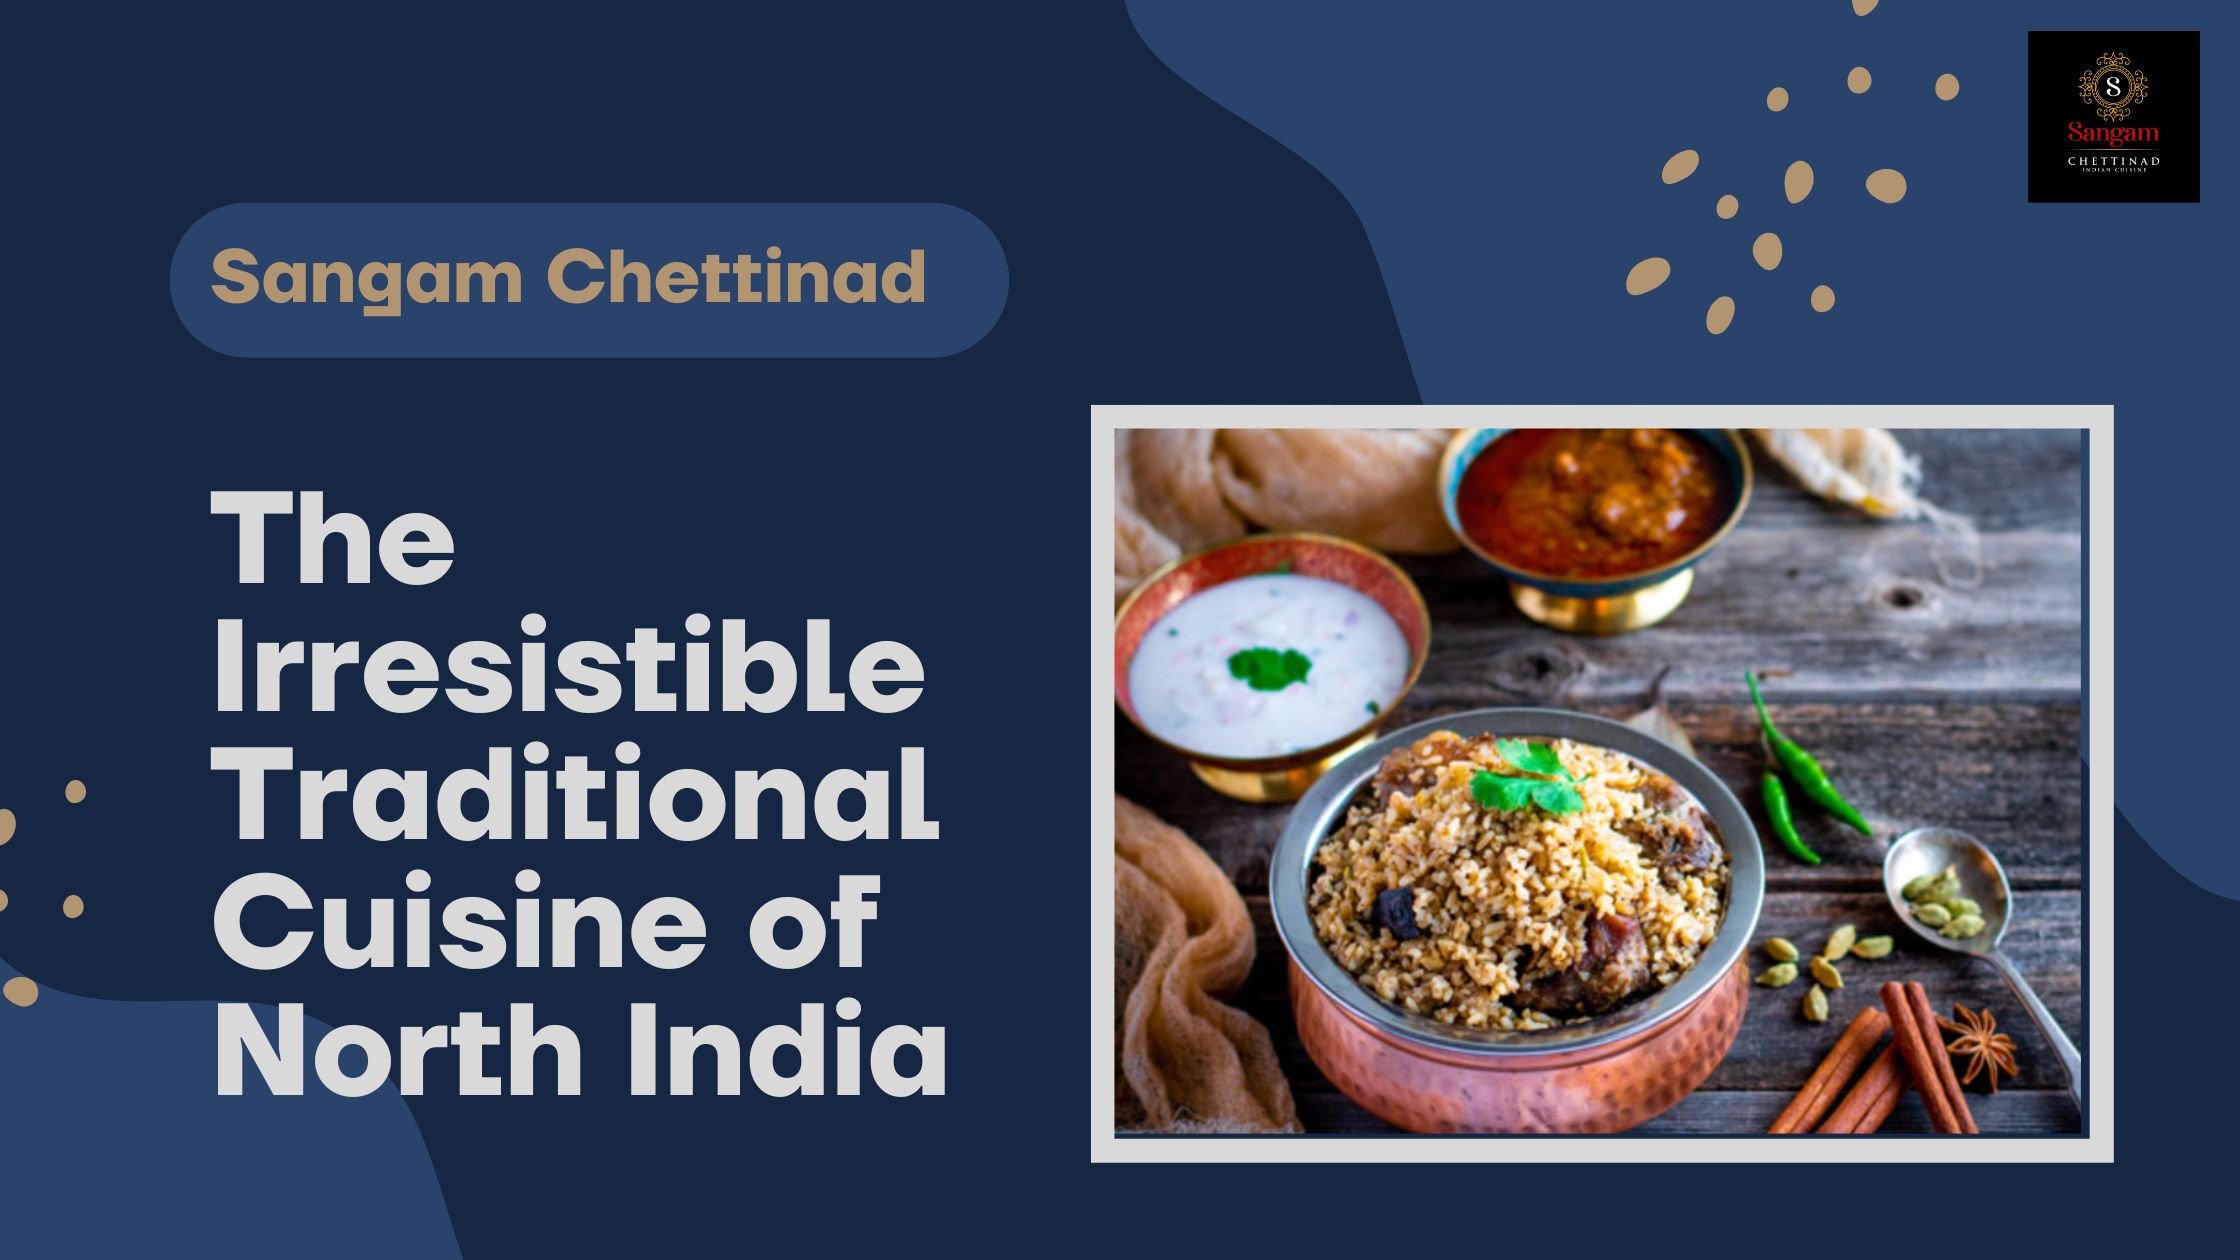 https://www.sangamchettinad.com/wp-content/uploads/2022/09/The-Irresistible-Traditional-Cuisine-of-North-India.jpg